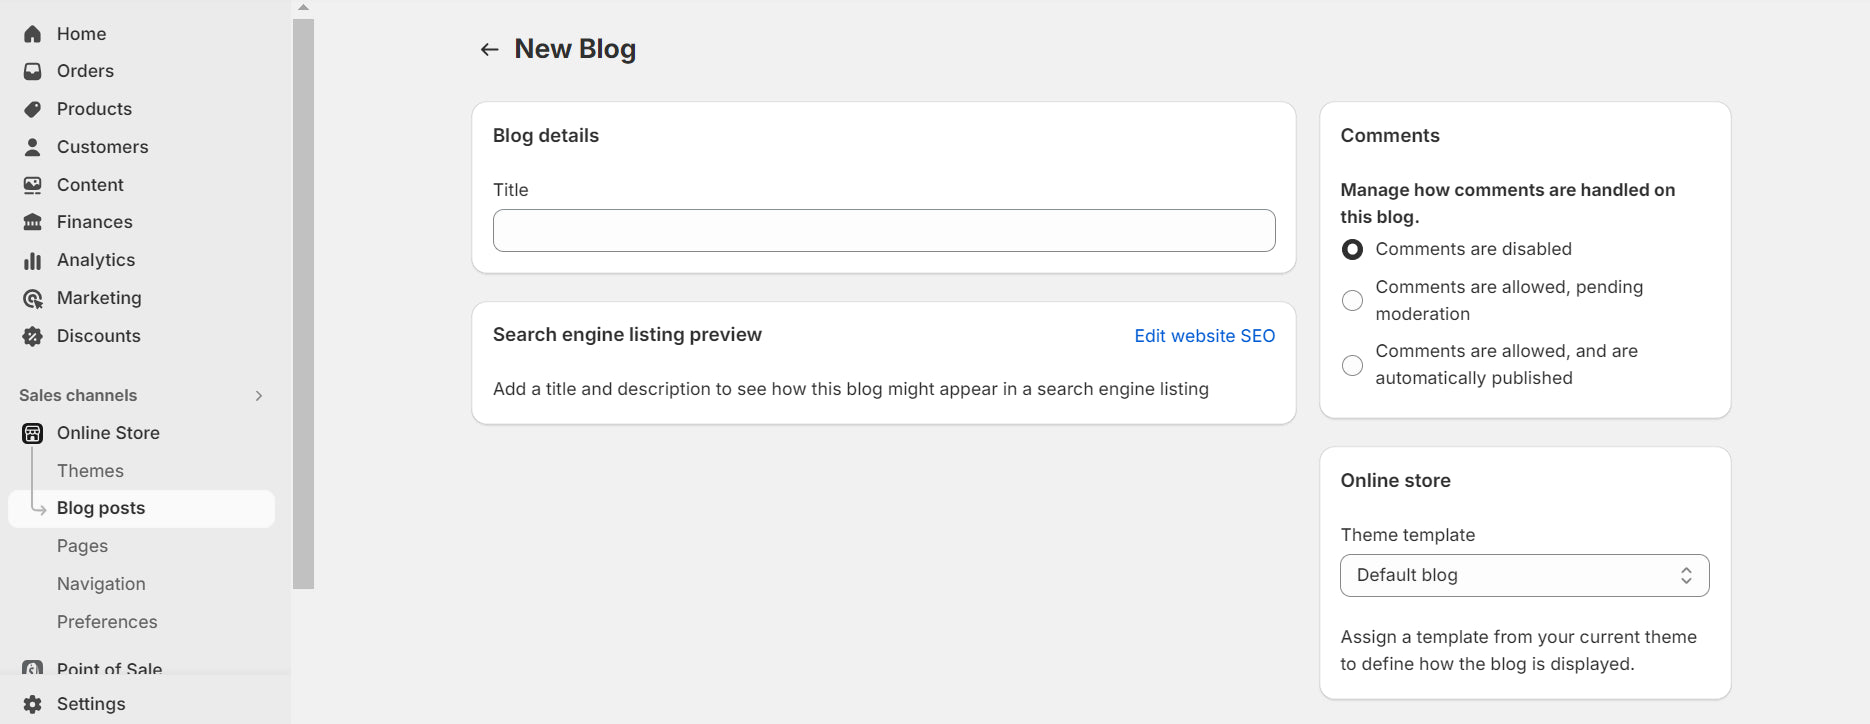 The section to create additional blog